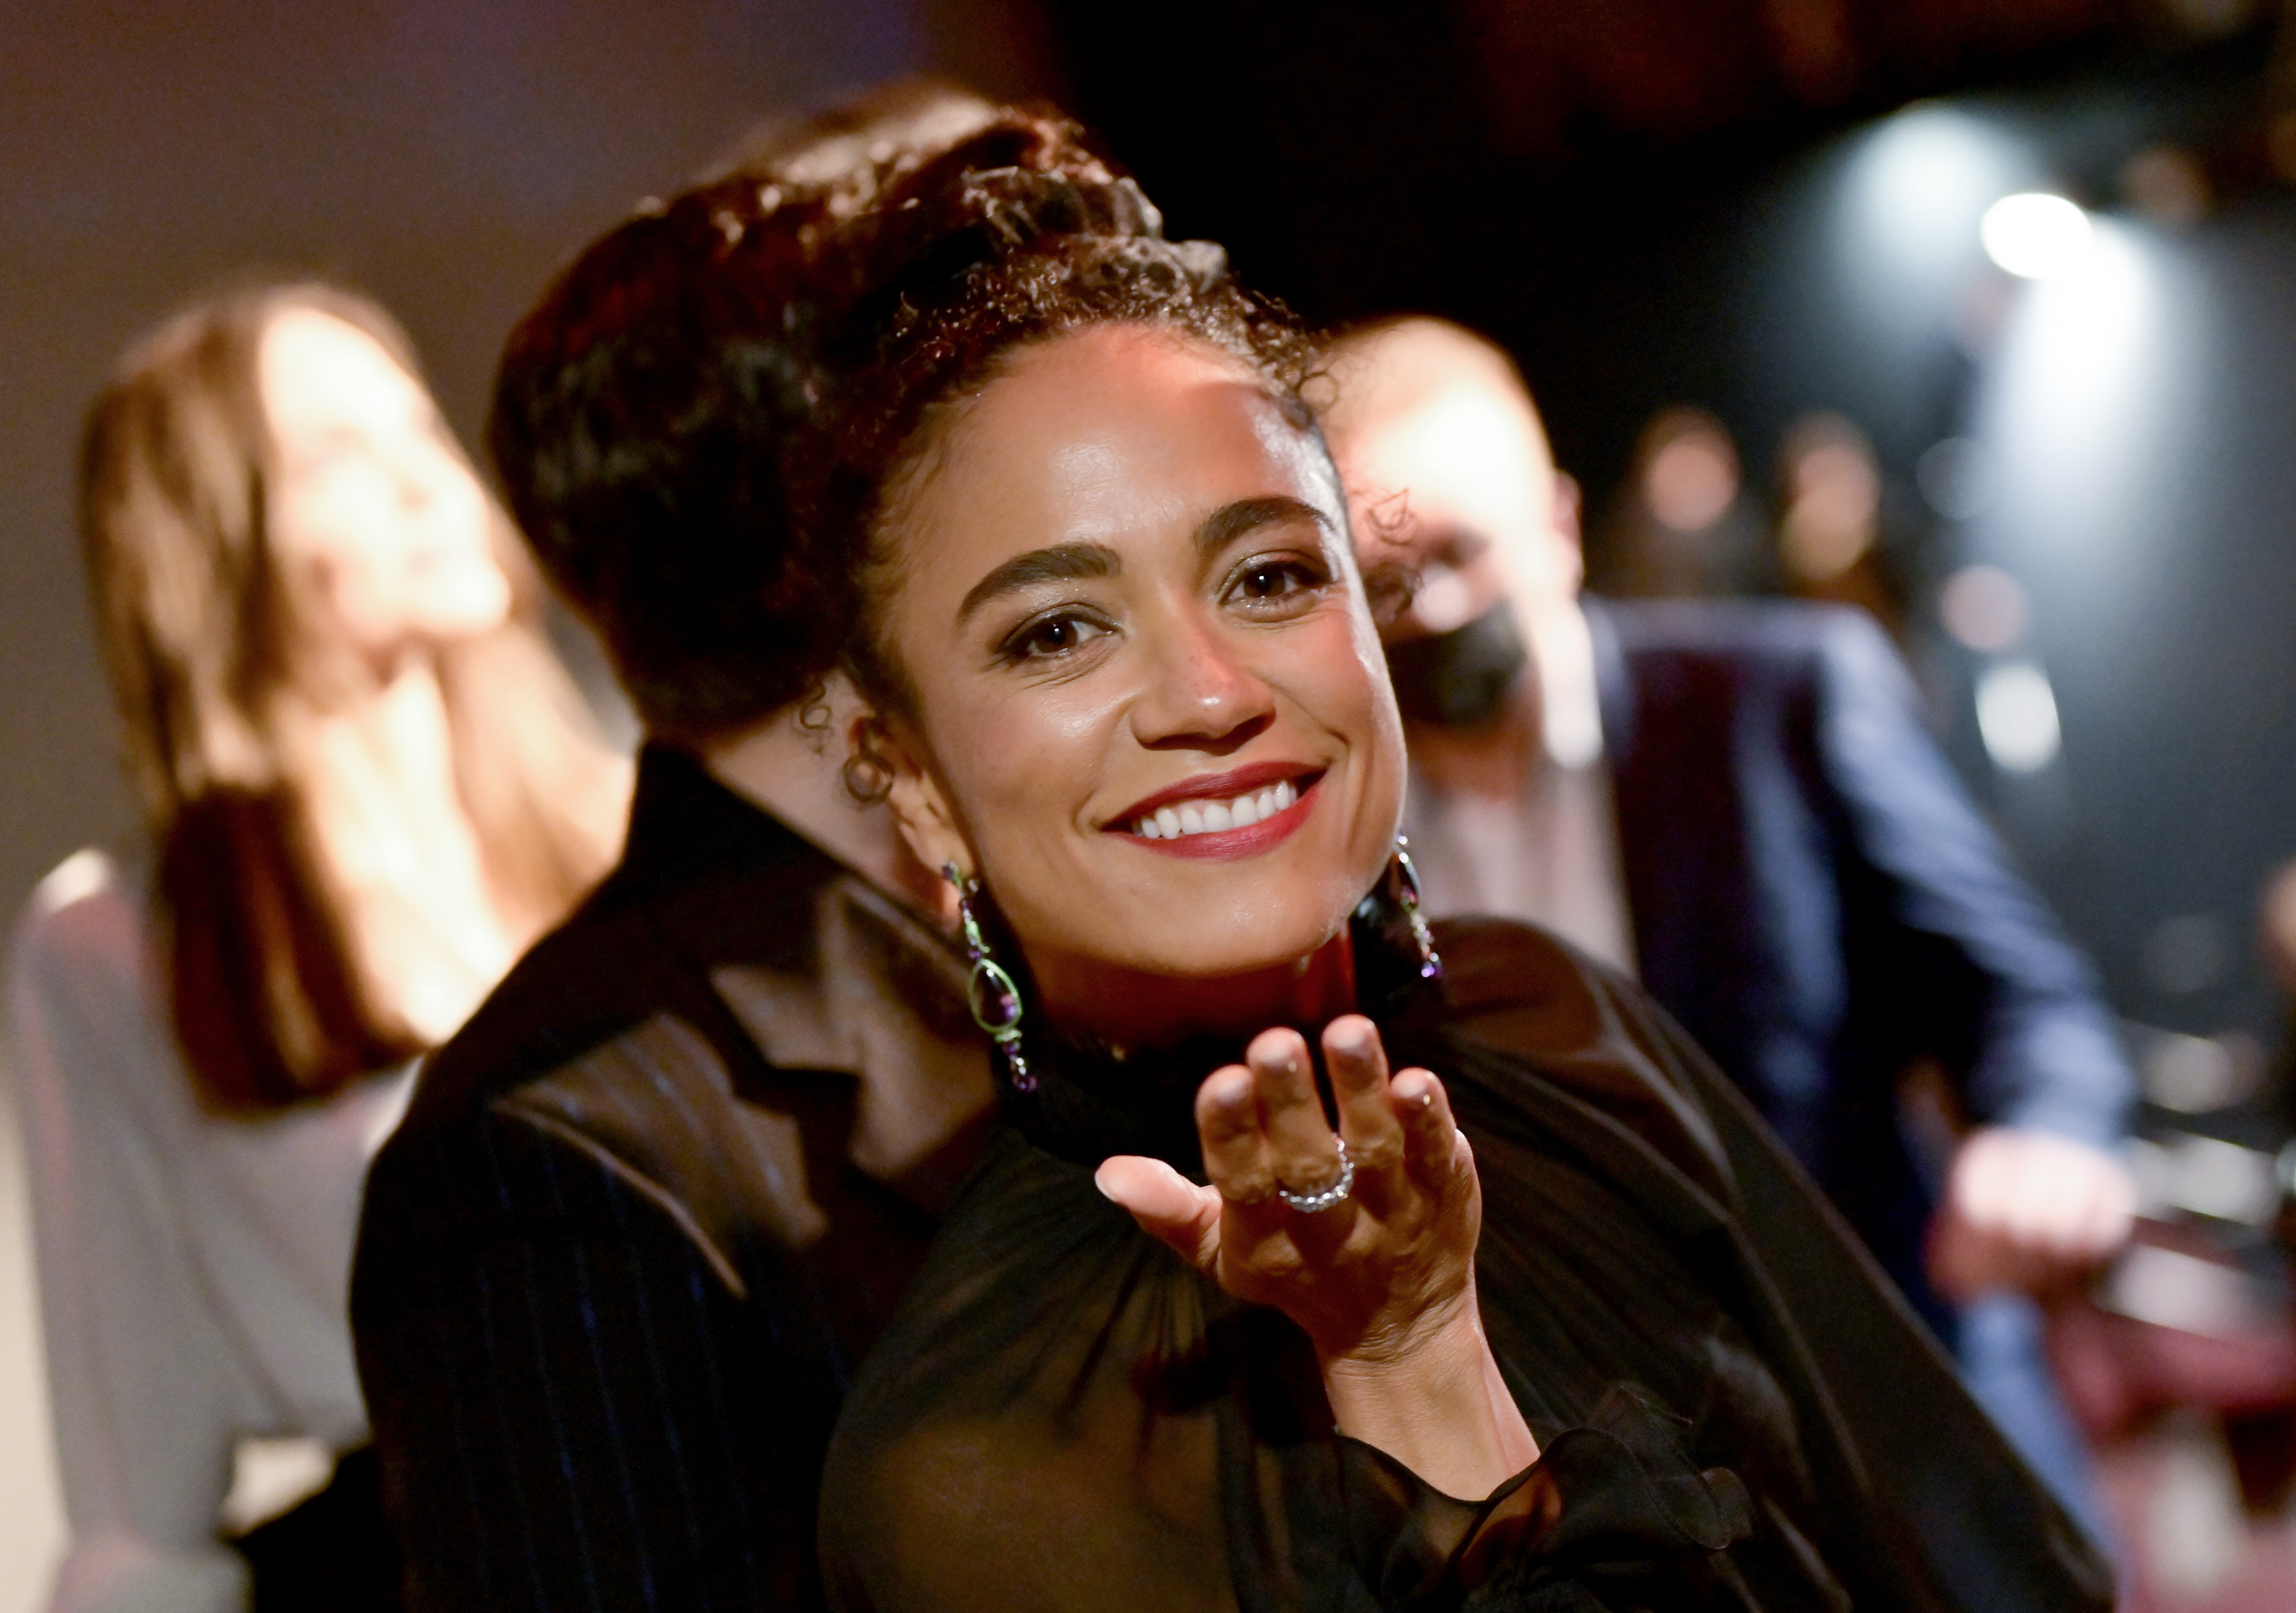 Marvel's 'Eternals' cast member Lauren Ridloff blows a kiss to the camera while wearing a long-sleeved black dress and dangly earrings.